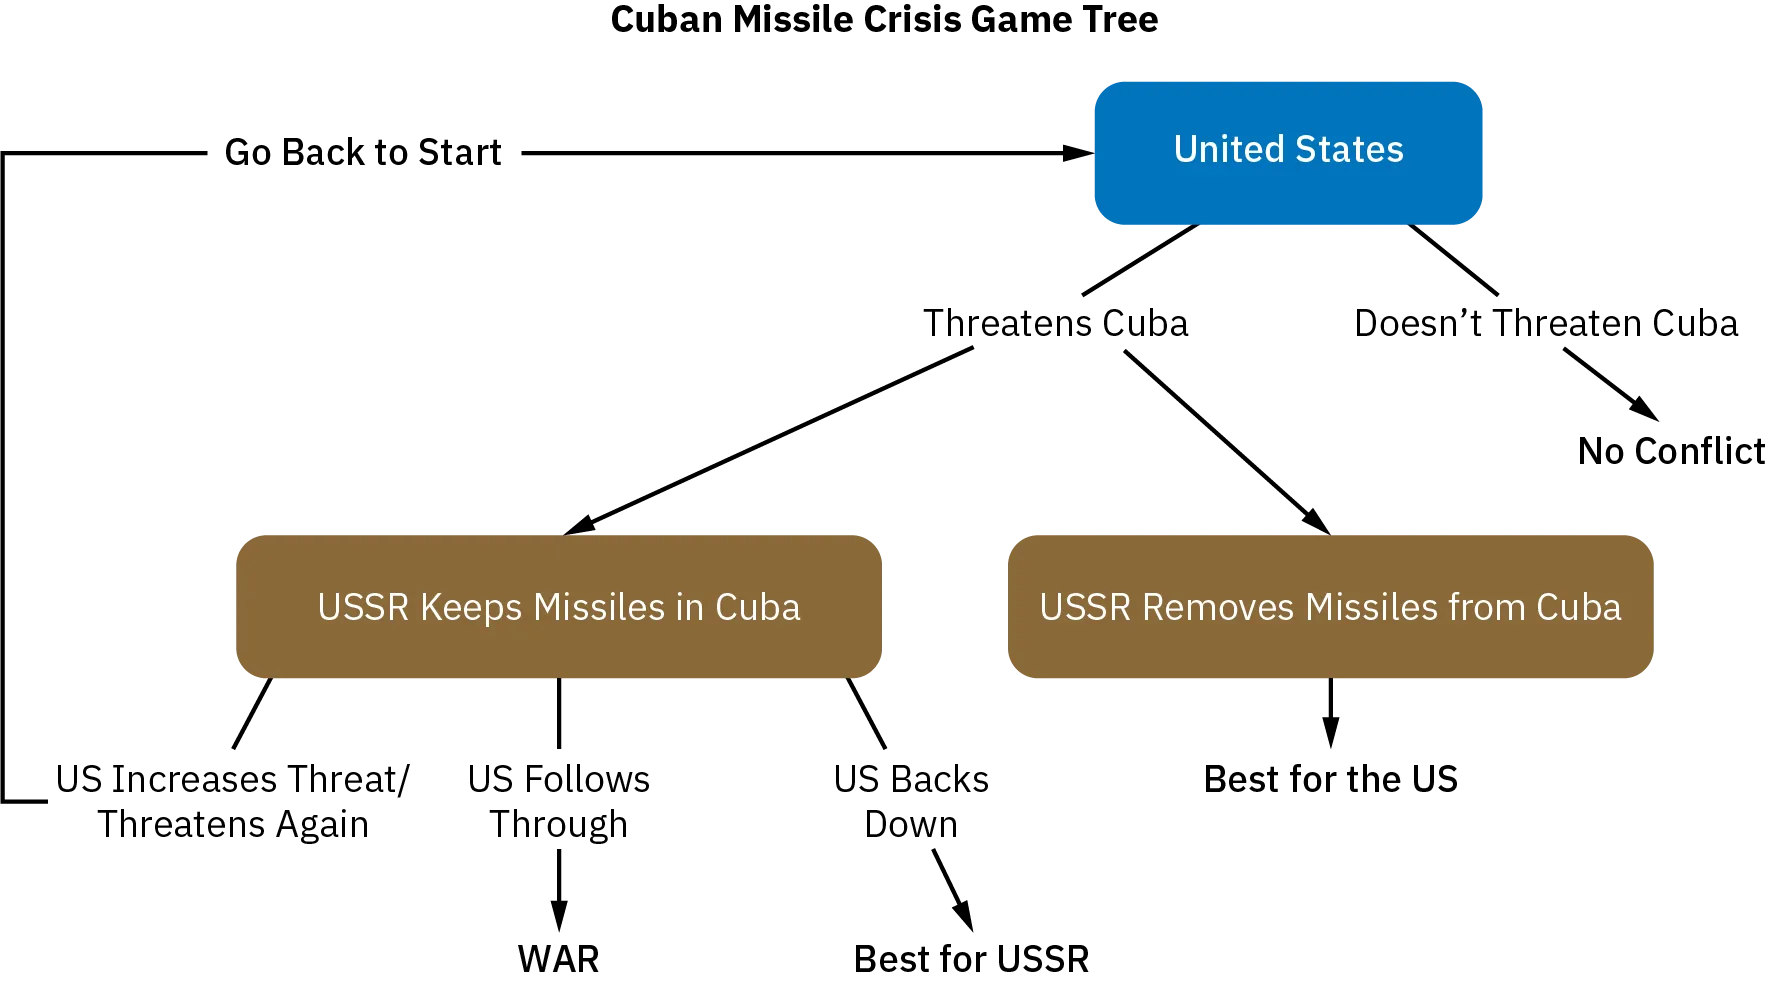 A flow chart shows potential consequences of different courses of action the United States and the USSR could have taken during the Cuban Missile Crisis. If the United States chose not to threaten Cuba, there would be no conflict. The best possible outcome for the US would occur if the United States threatened Cuba and the USSR removed its missiles from Cuba. If the USSR kept missiles in Cuba, the US would have three choices. The best possible outcome for the USSR in that situation would be if the US decided to back down. If the US followed through on its threat, the result would be war. If the US increased it’s threat, the USSR would need to reevaluate whether to keep or remove its missiles from Cuba.